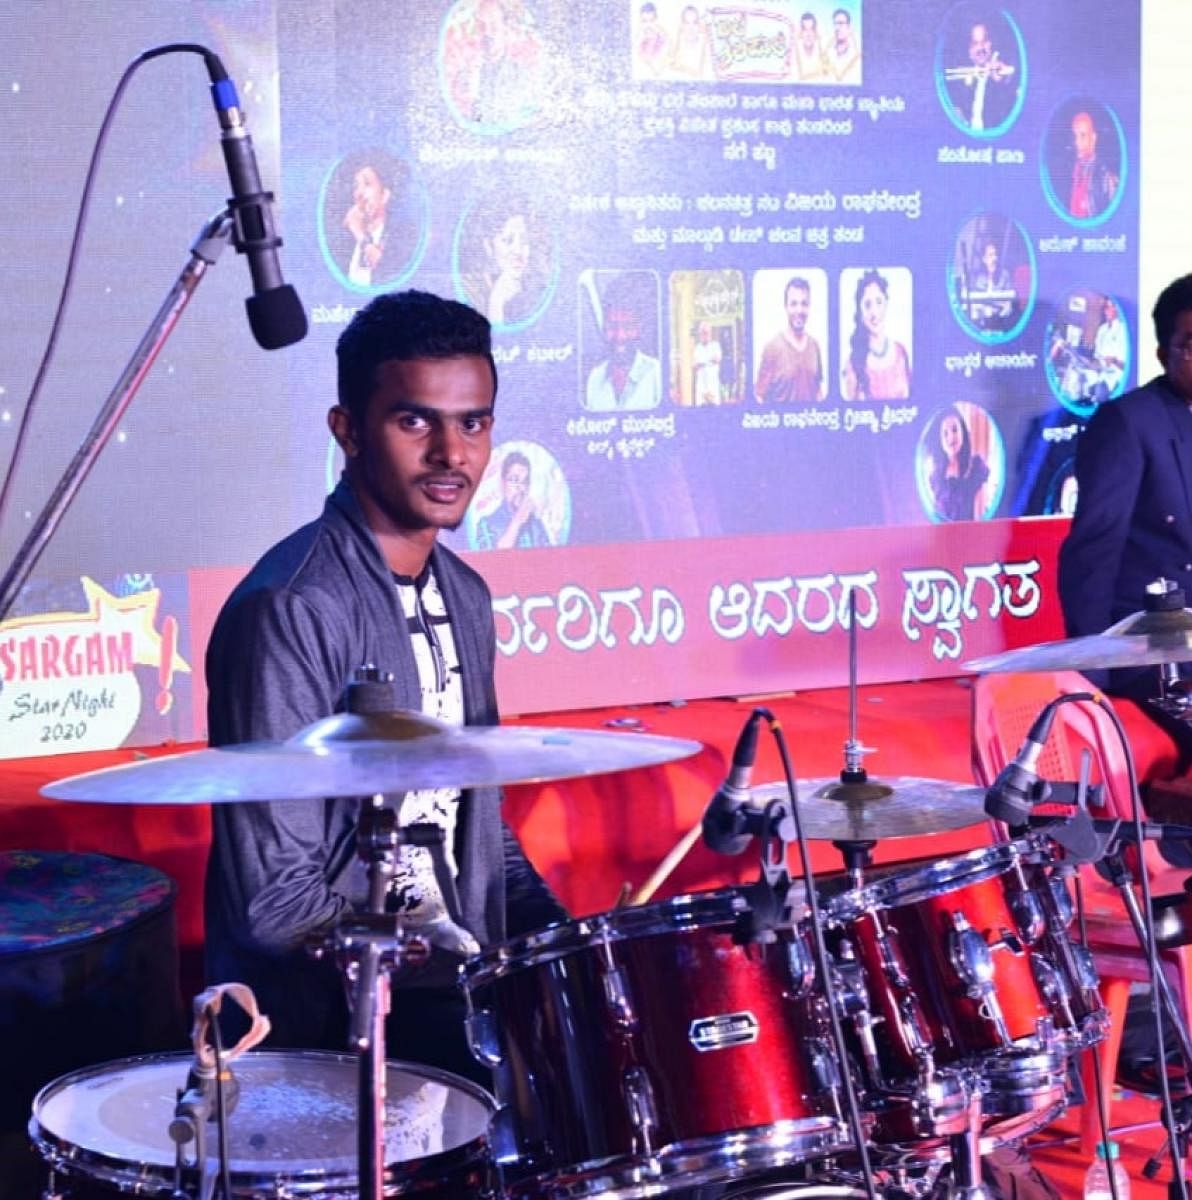 Abhin Devadiga juggles drumming and sprinting with ease.